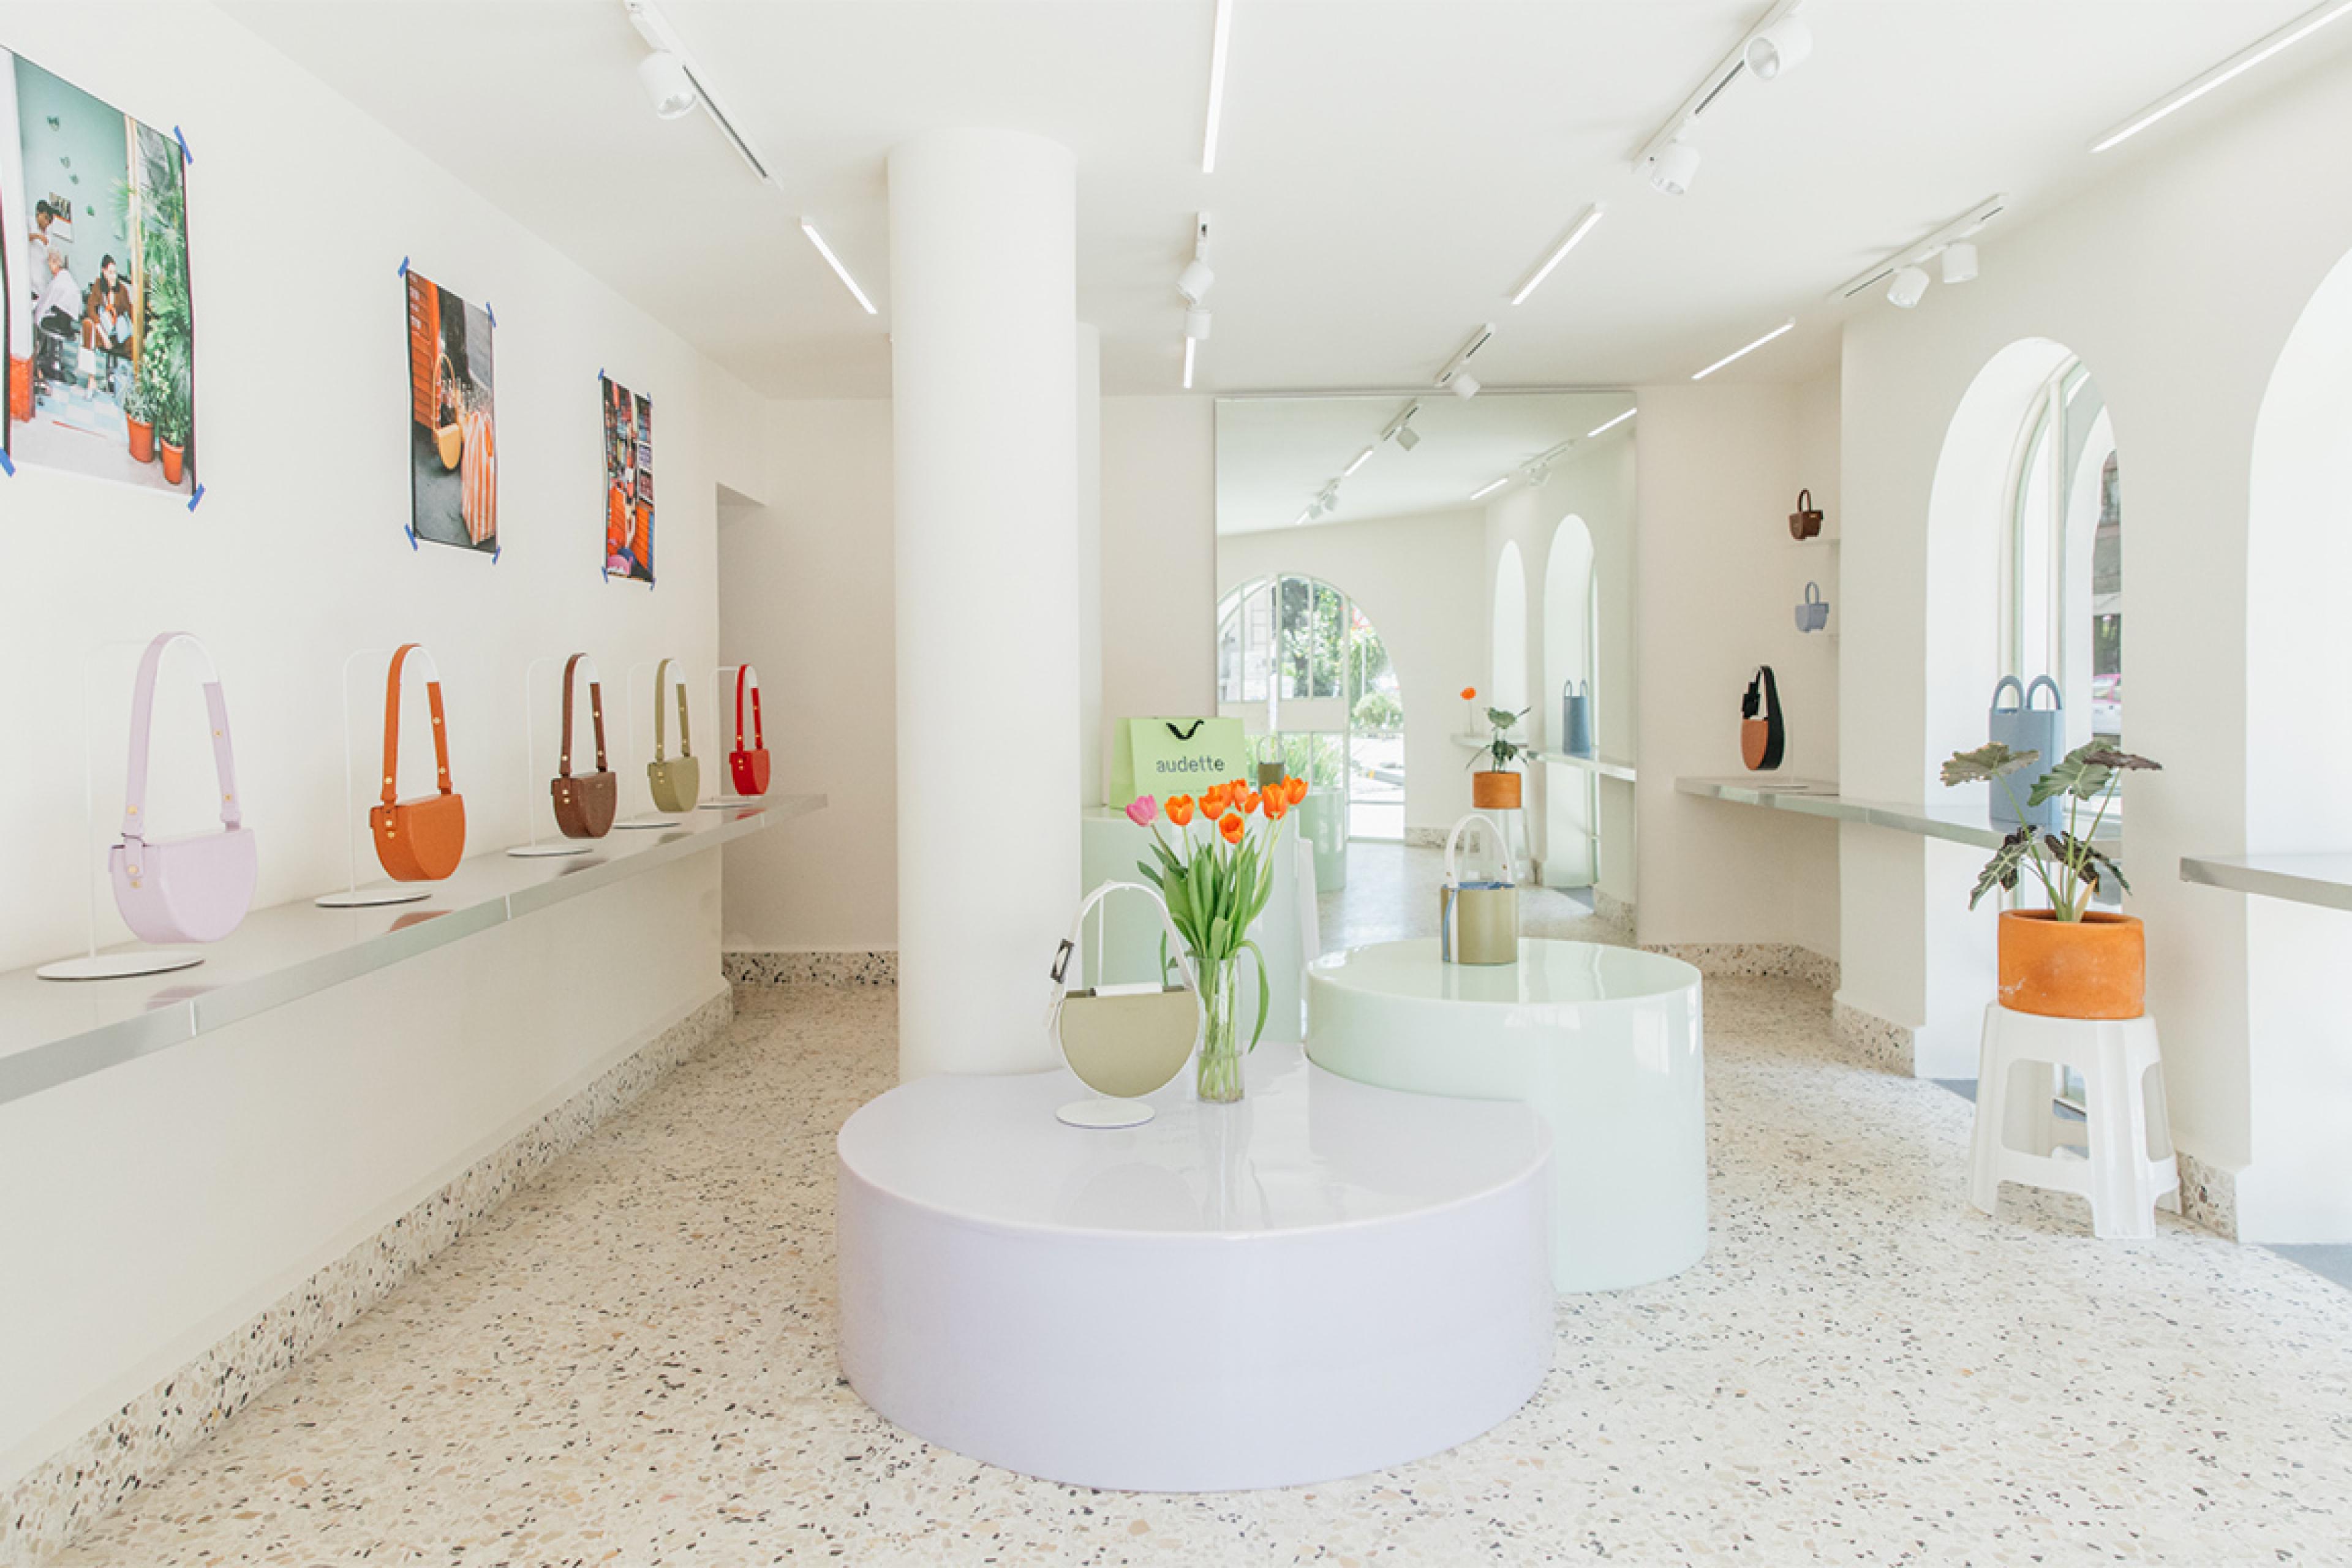 store in mexico city with white walls and terrazzo floors that has colorful purses for sale on the wall